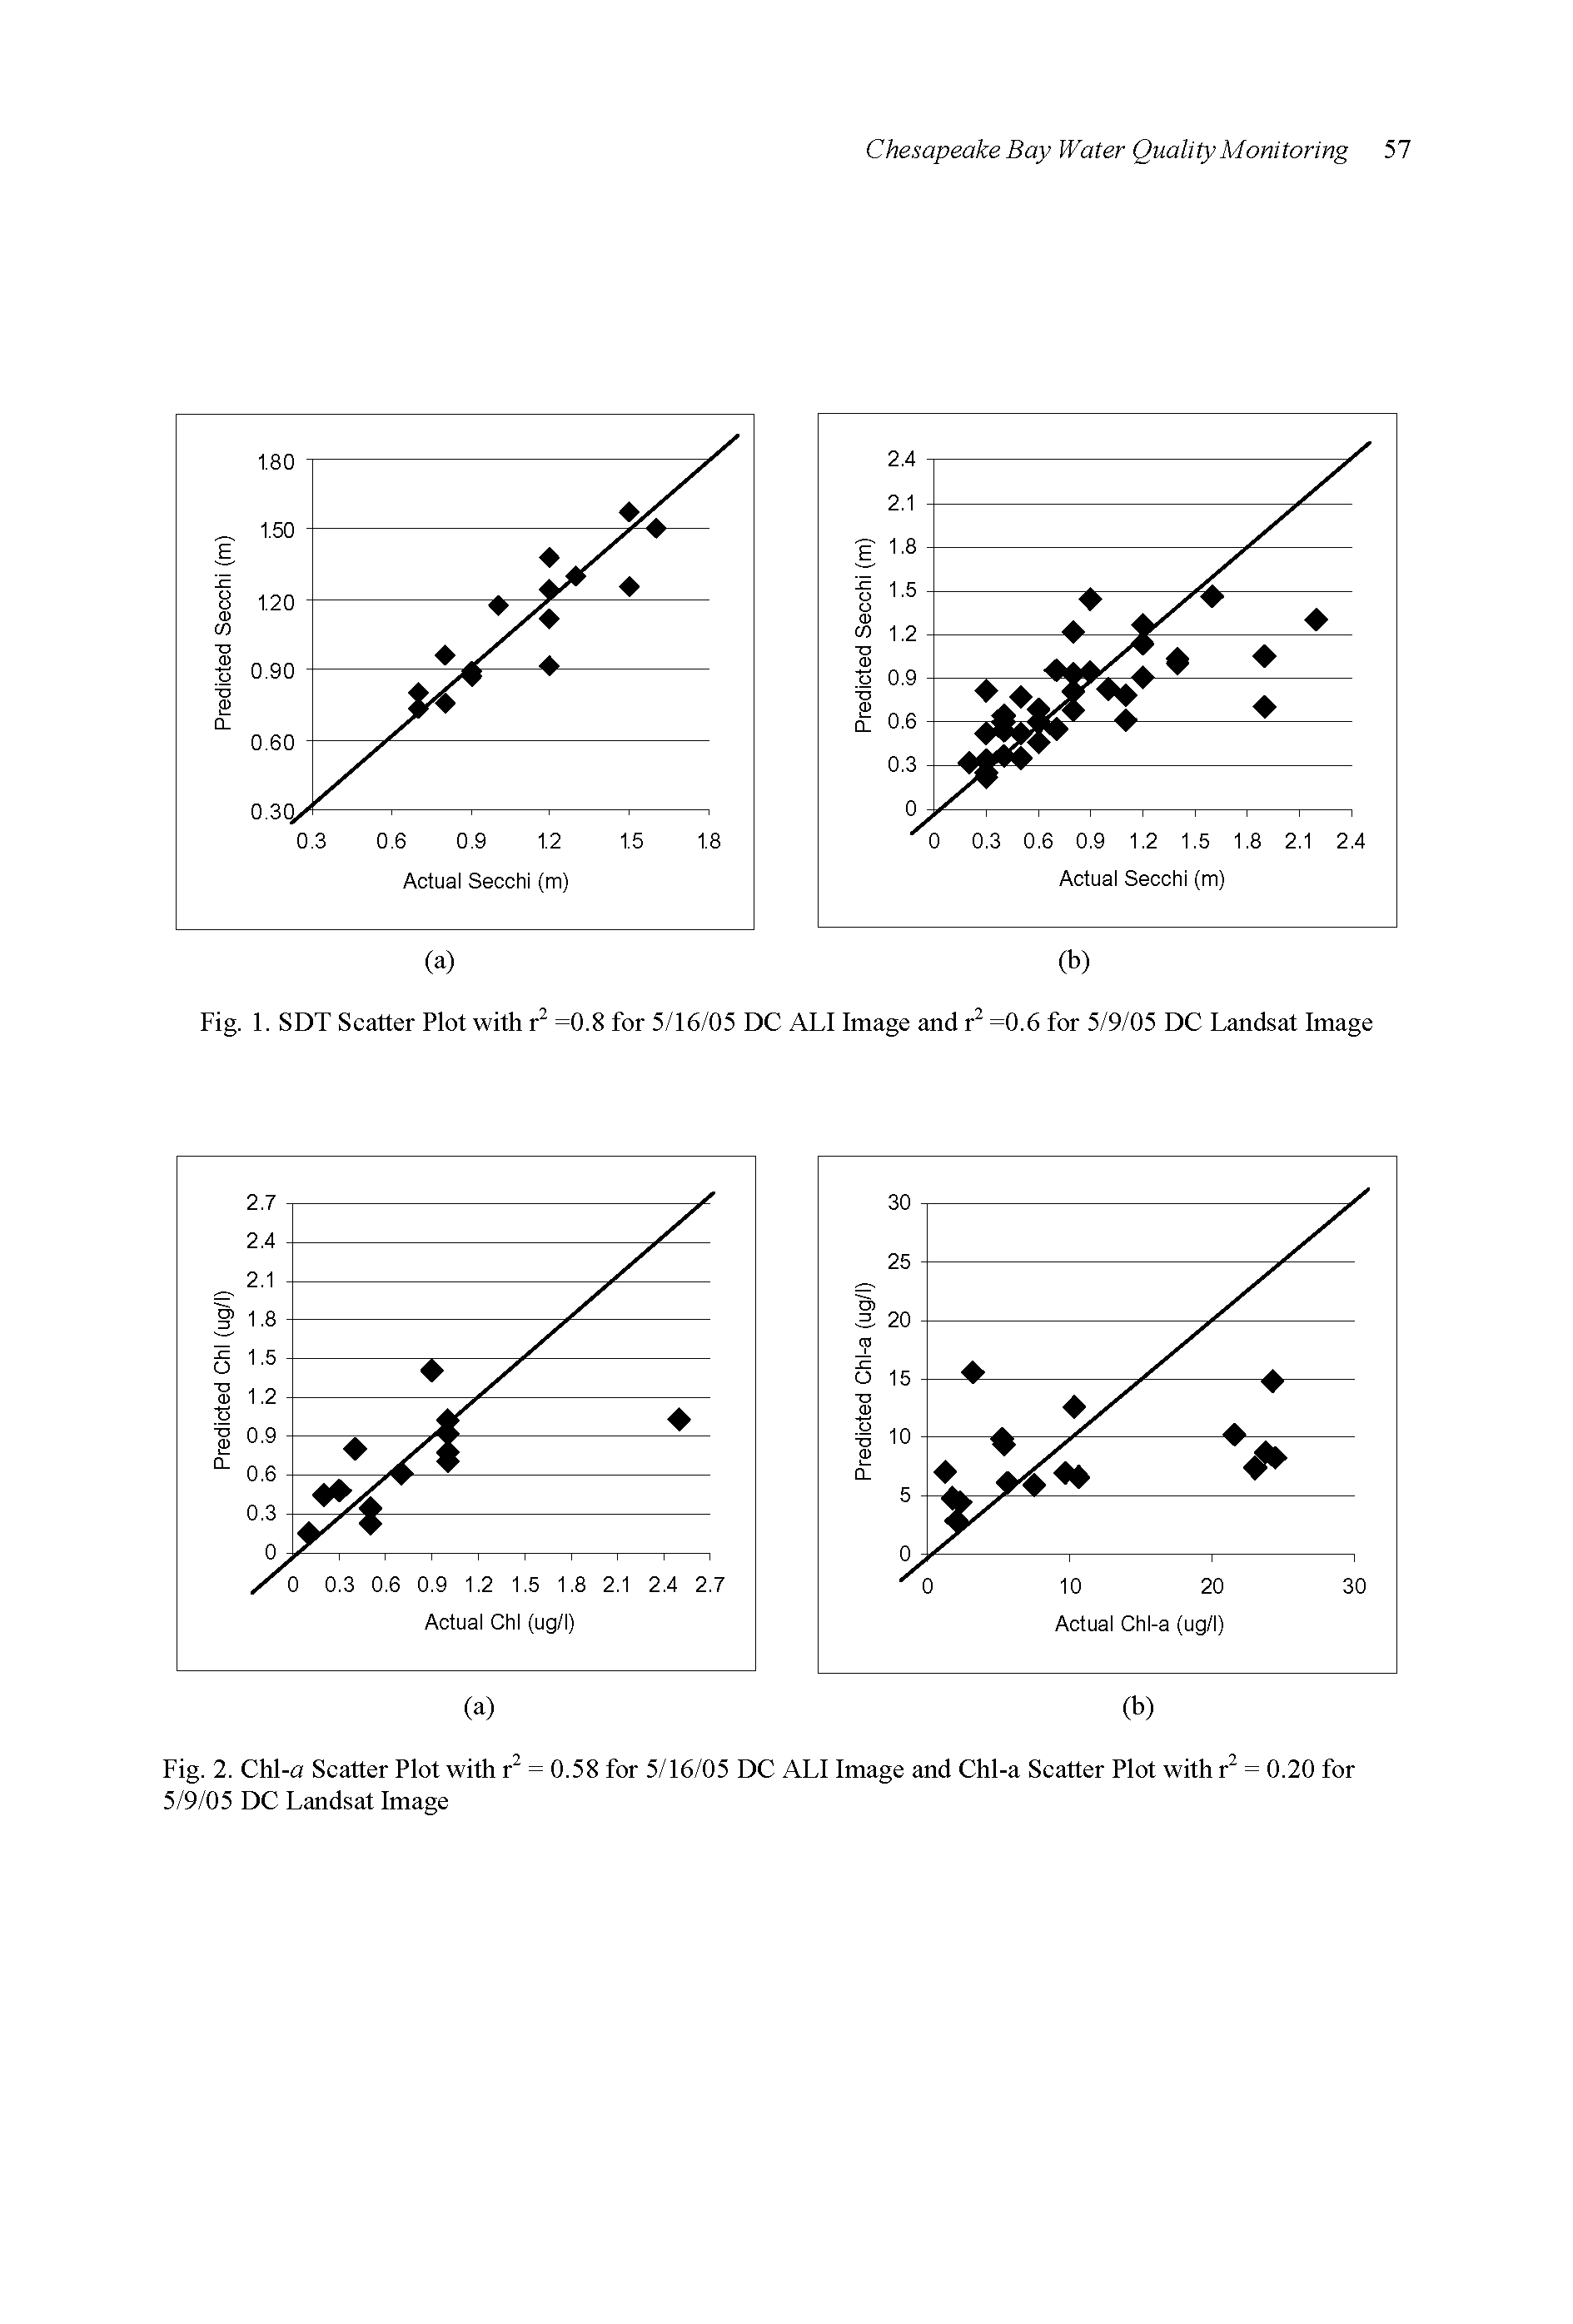 Fig. 2. Chl-a Scatter Plot with r = 0.58 for 5/16/05 DC ALI Image and Chl-a Scatter Plot with r = 0.20 for 5/9/05 DC Landsat Image...